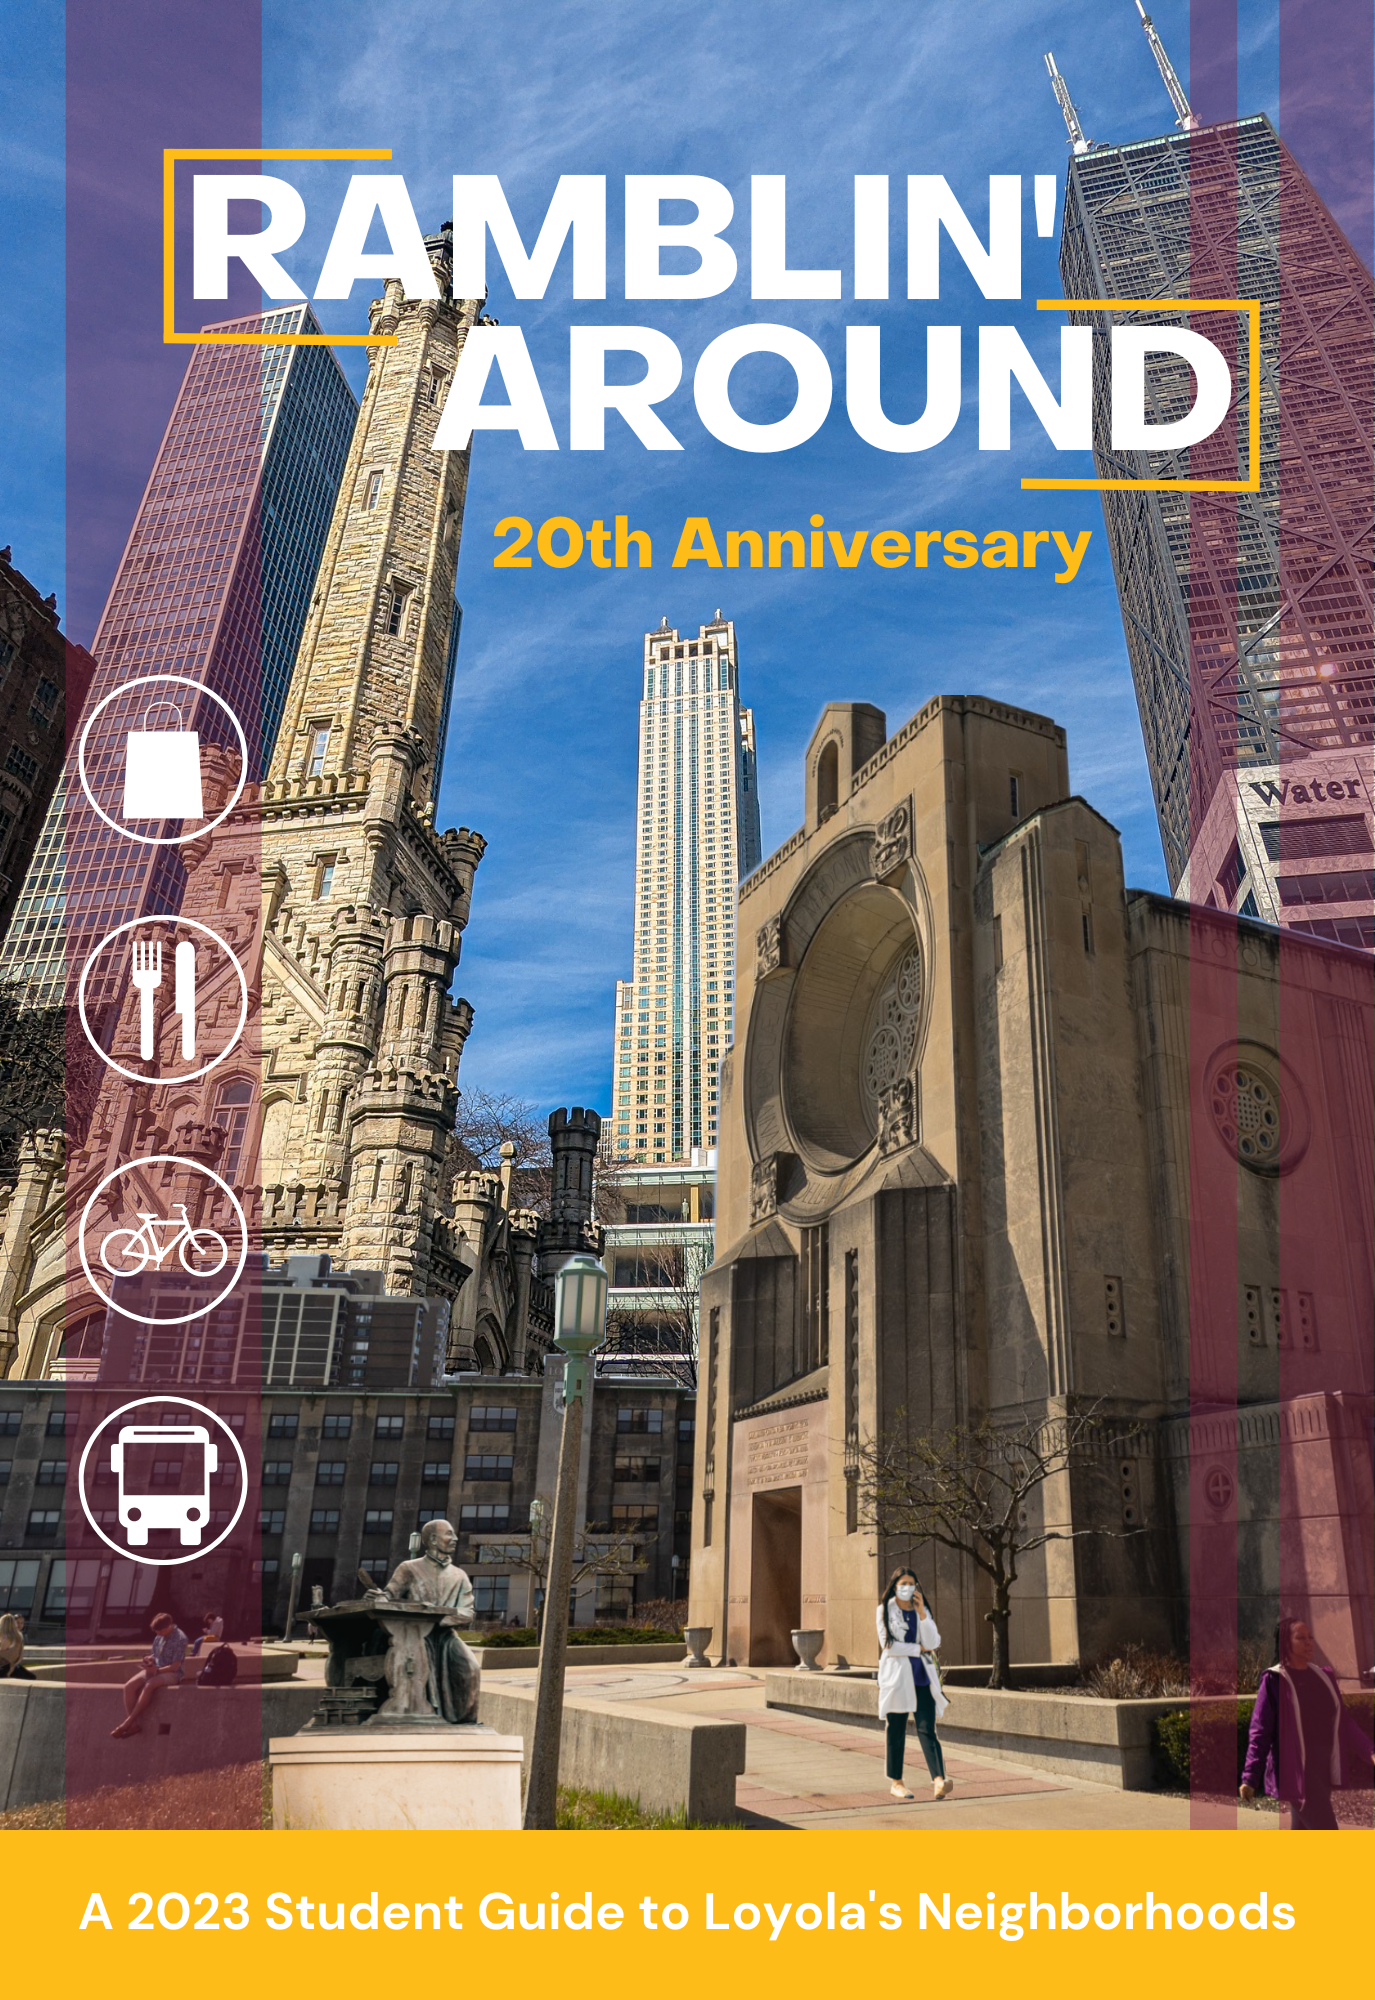 
Check out our 2023 Ramblin' Around Guide